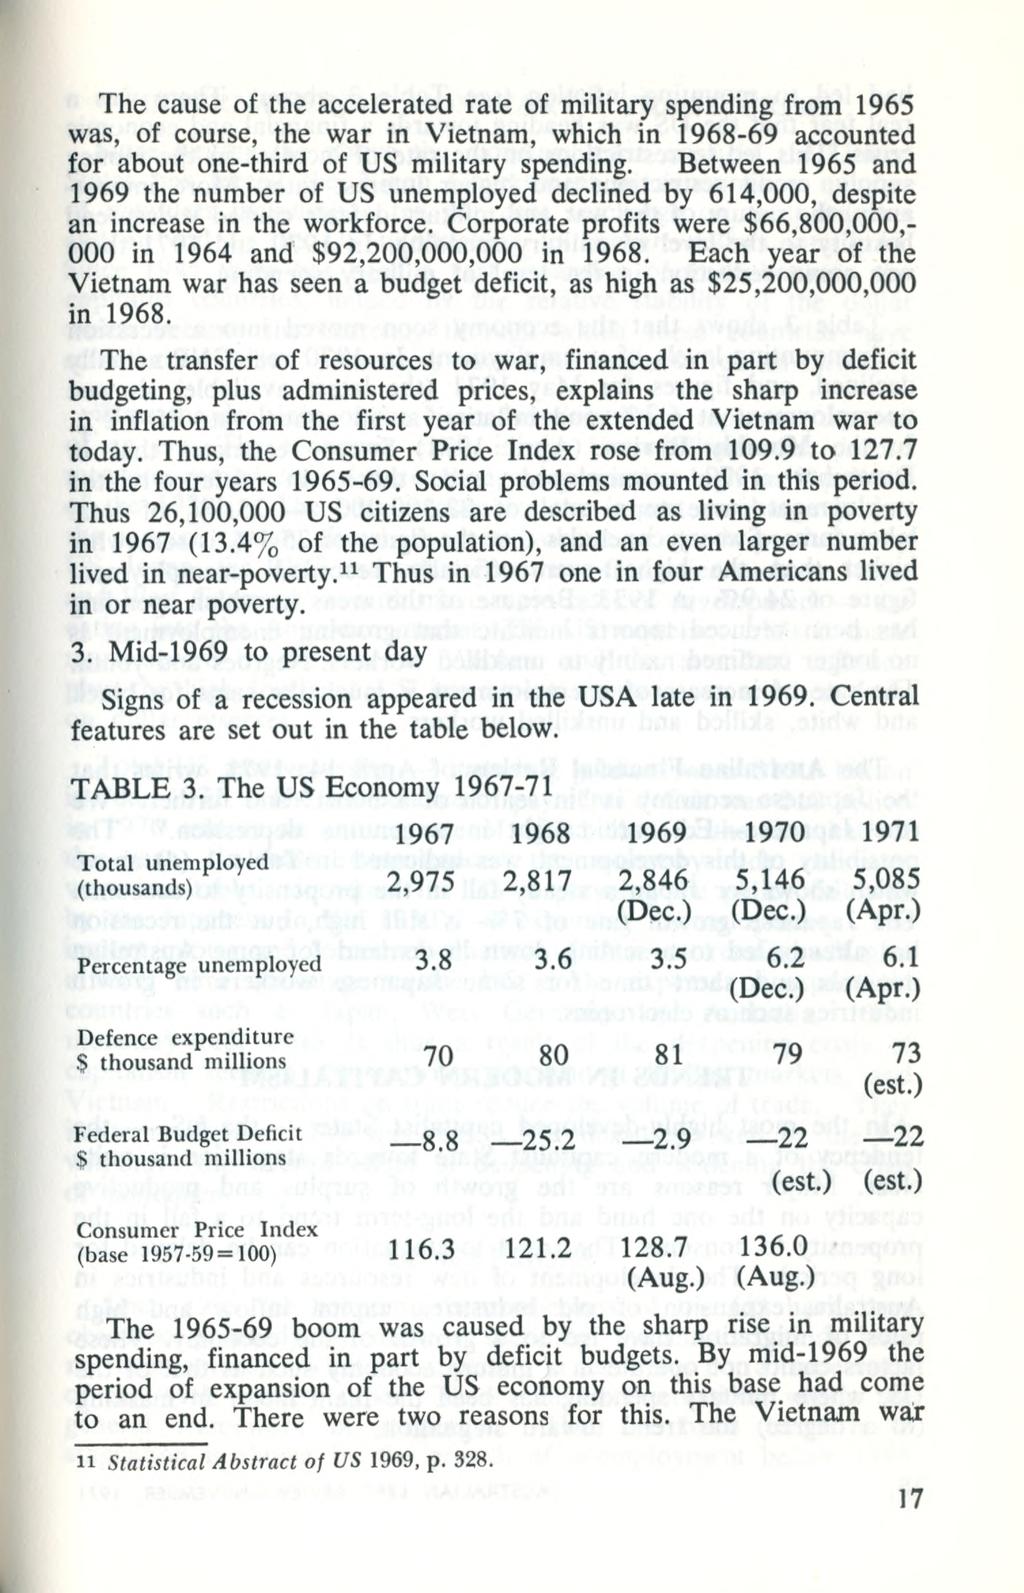 T he cause of the accelerated rate of military spending from 1965 was, of course, the w ar in V ietnam, which in 1968-69 accounted for about one-third of US m ilitary spending.